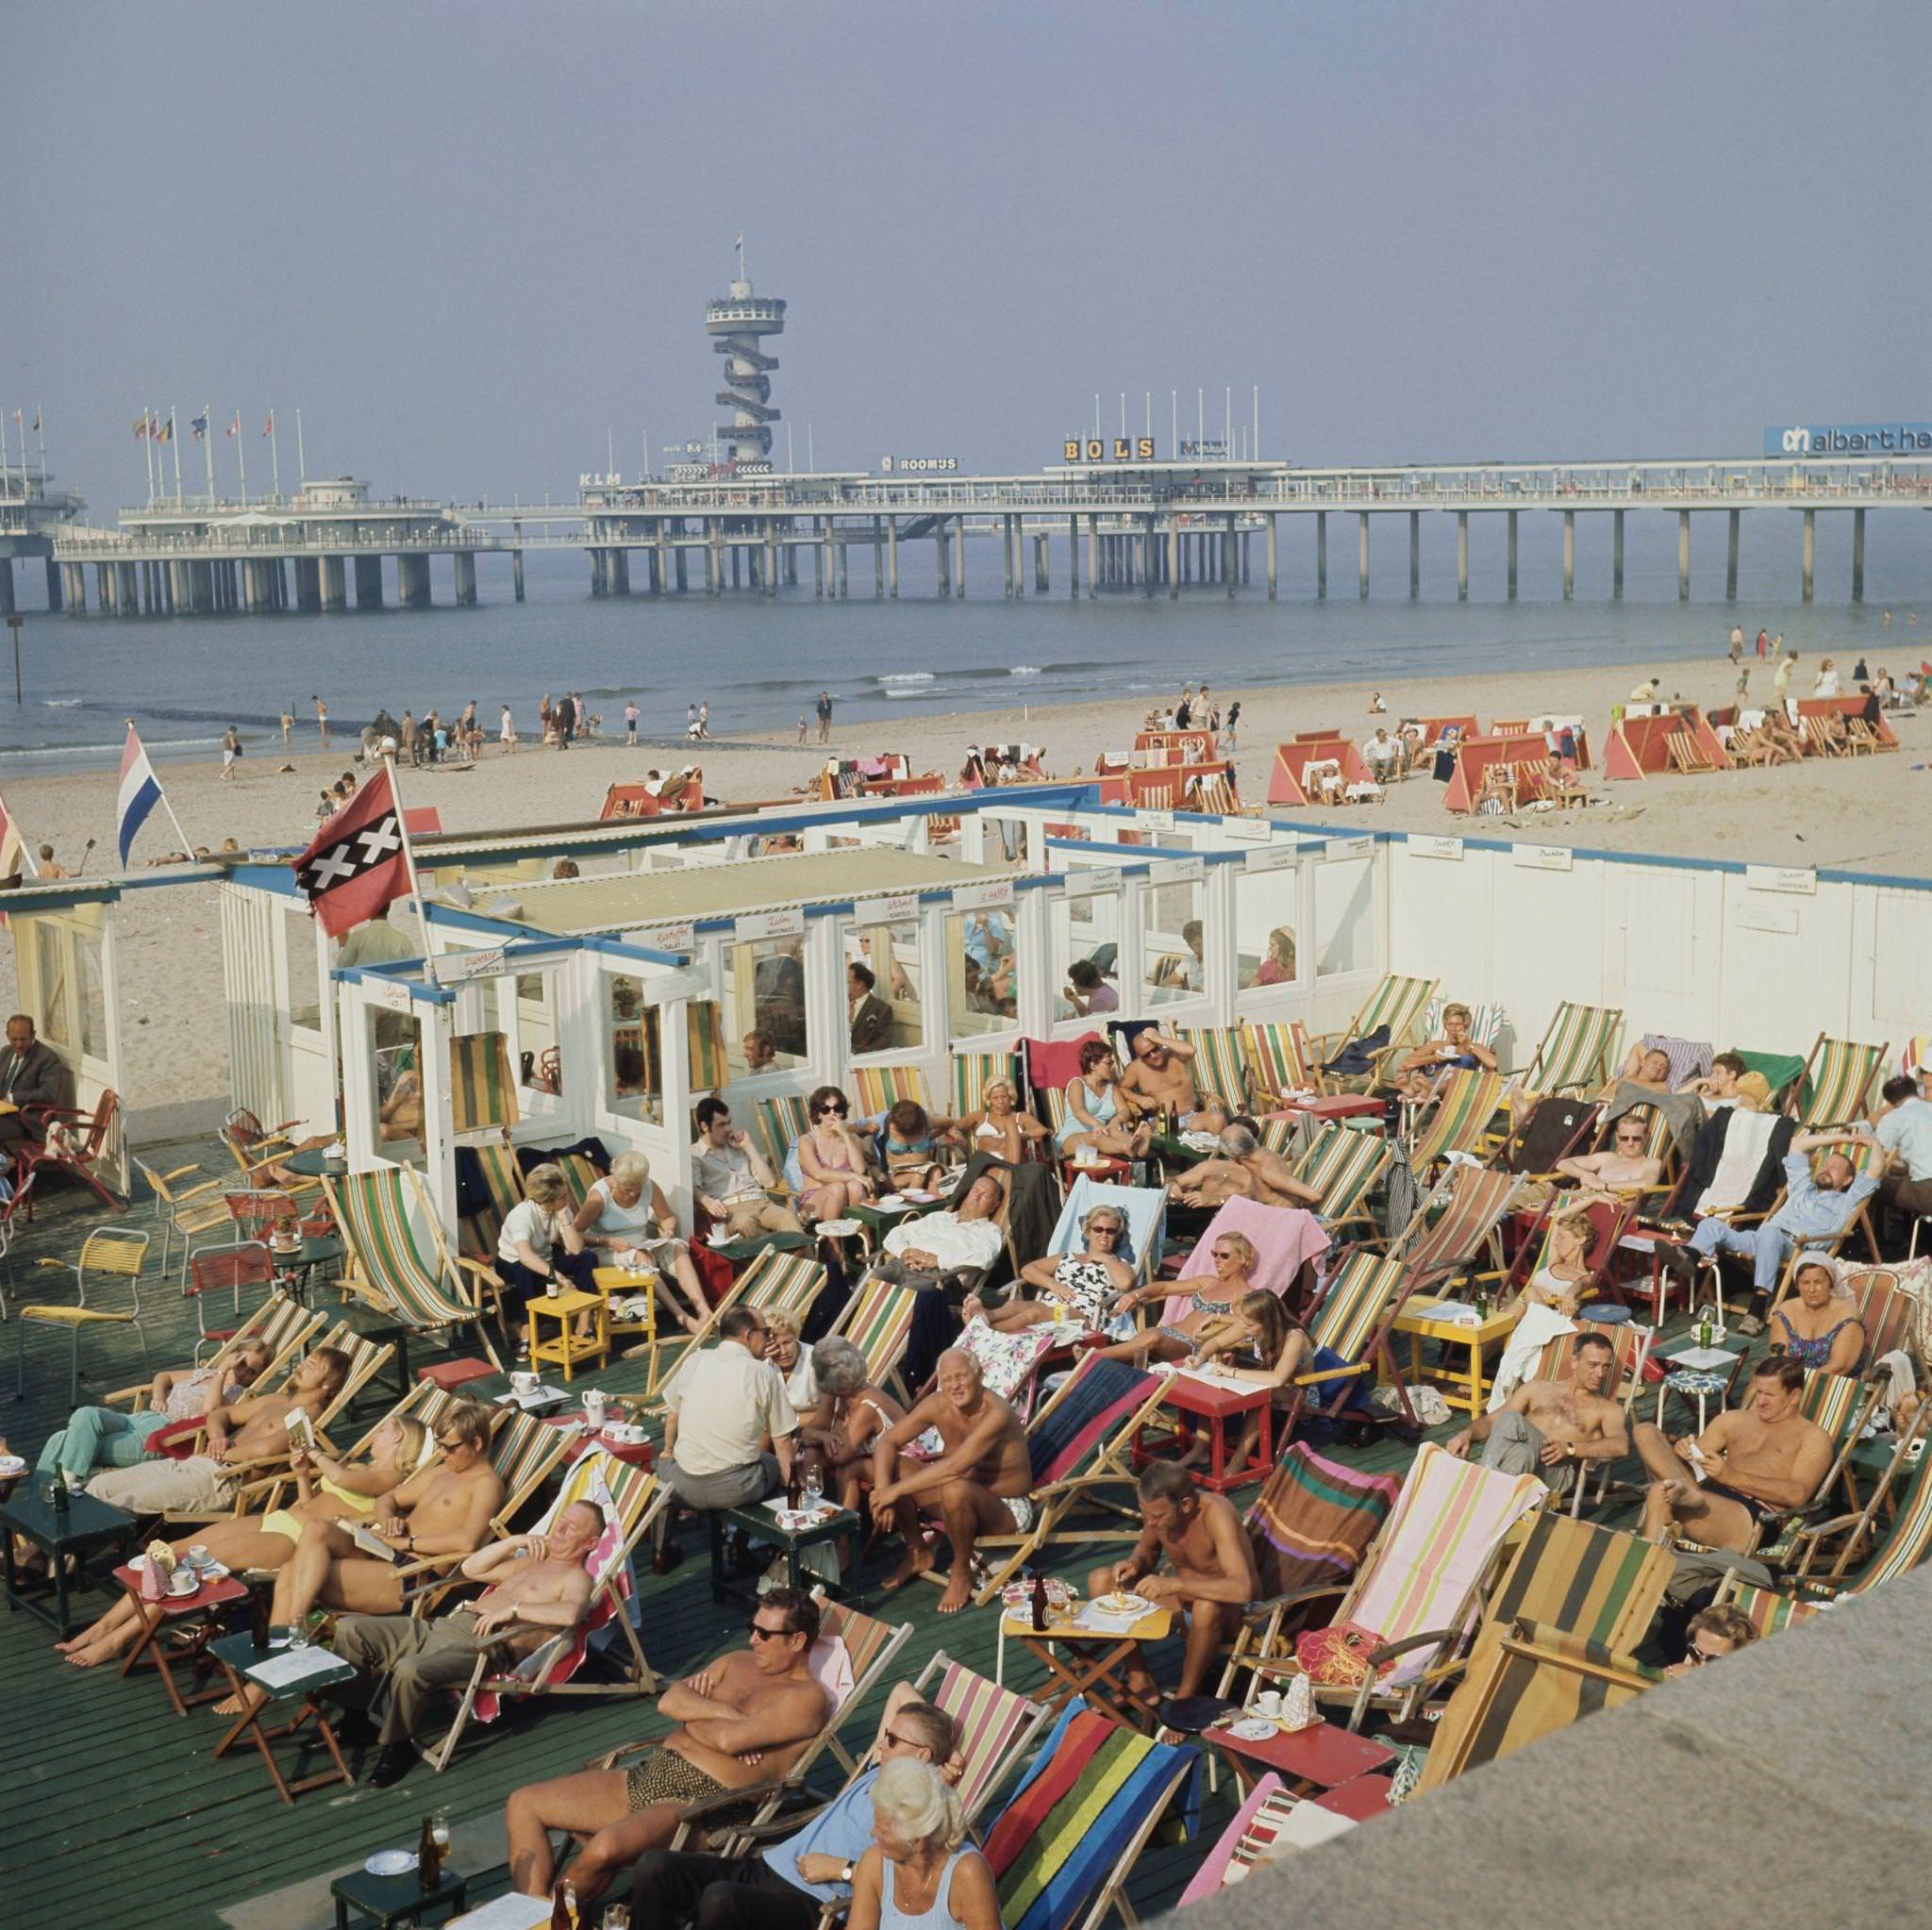 Visitors and holidaymakers sunbathe on deckchairs on a terrace beside the sandy beach at the seaside resort of Scheveningen near The Hague in the Netherlands, 1970s